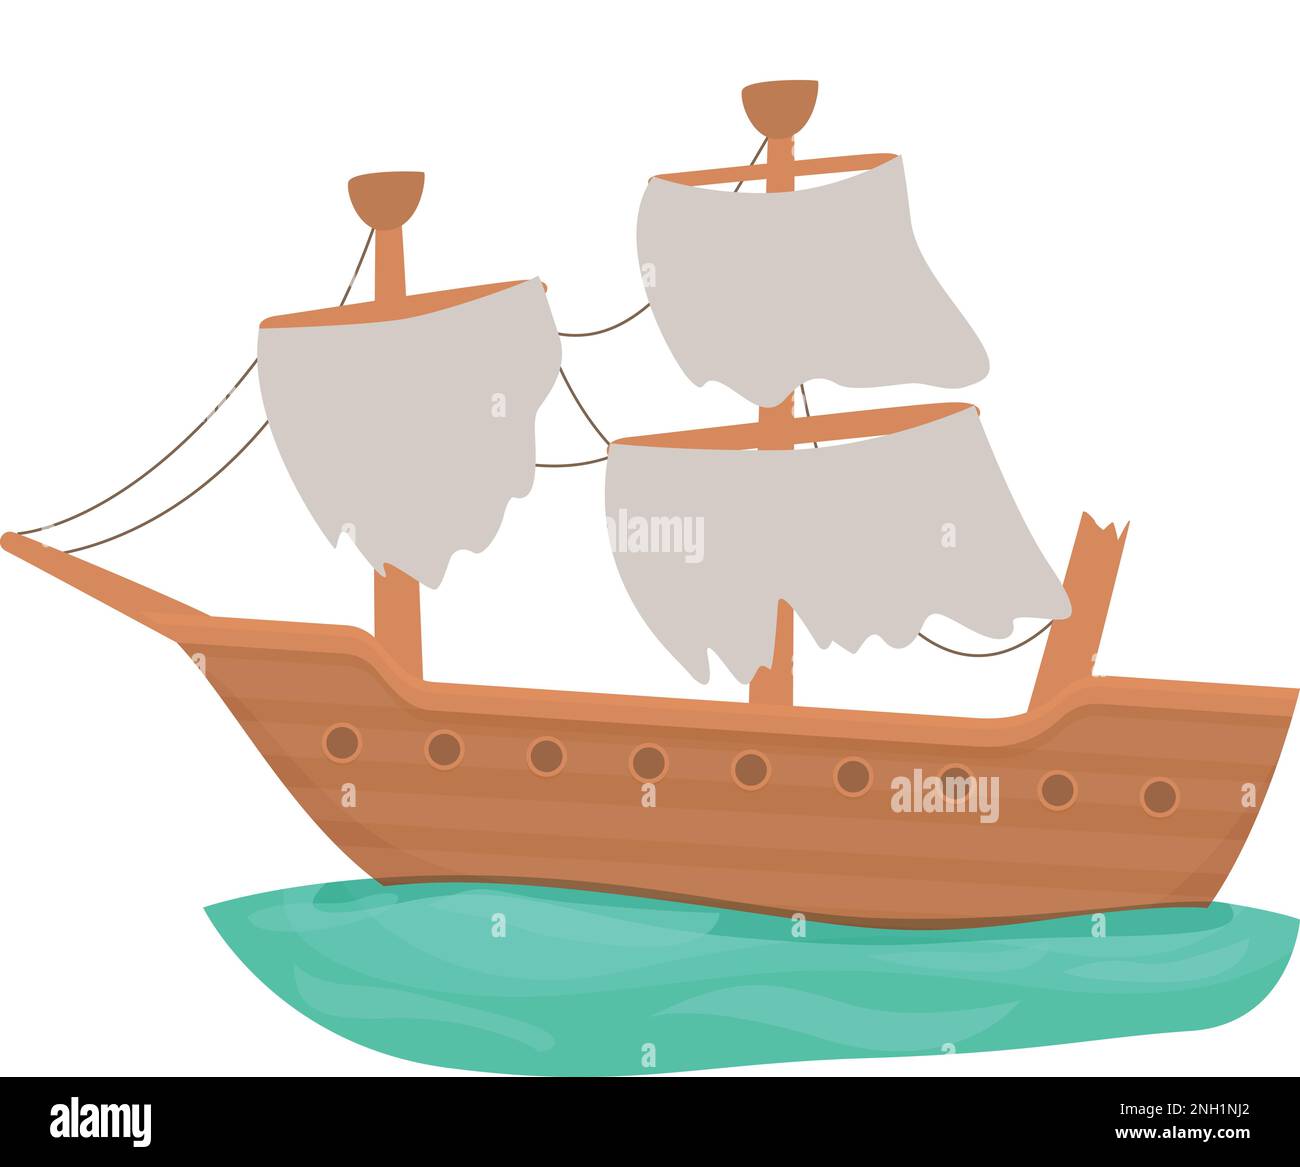 Abandoned toy boat Stock Vector Images - Alamy